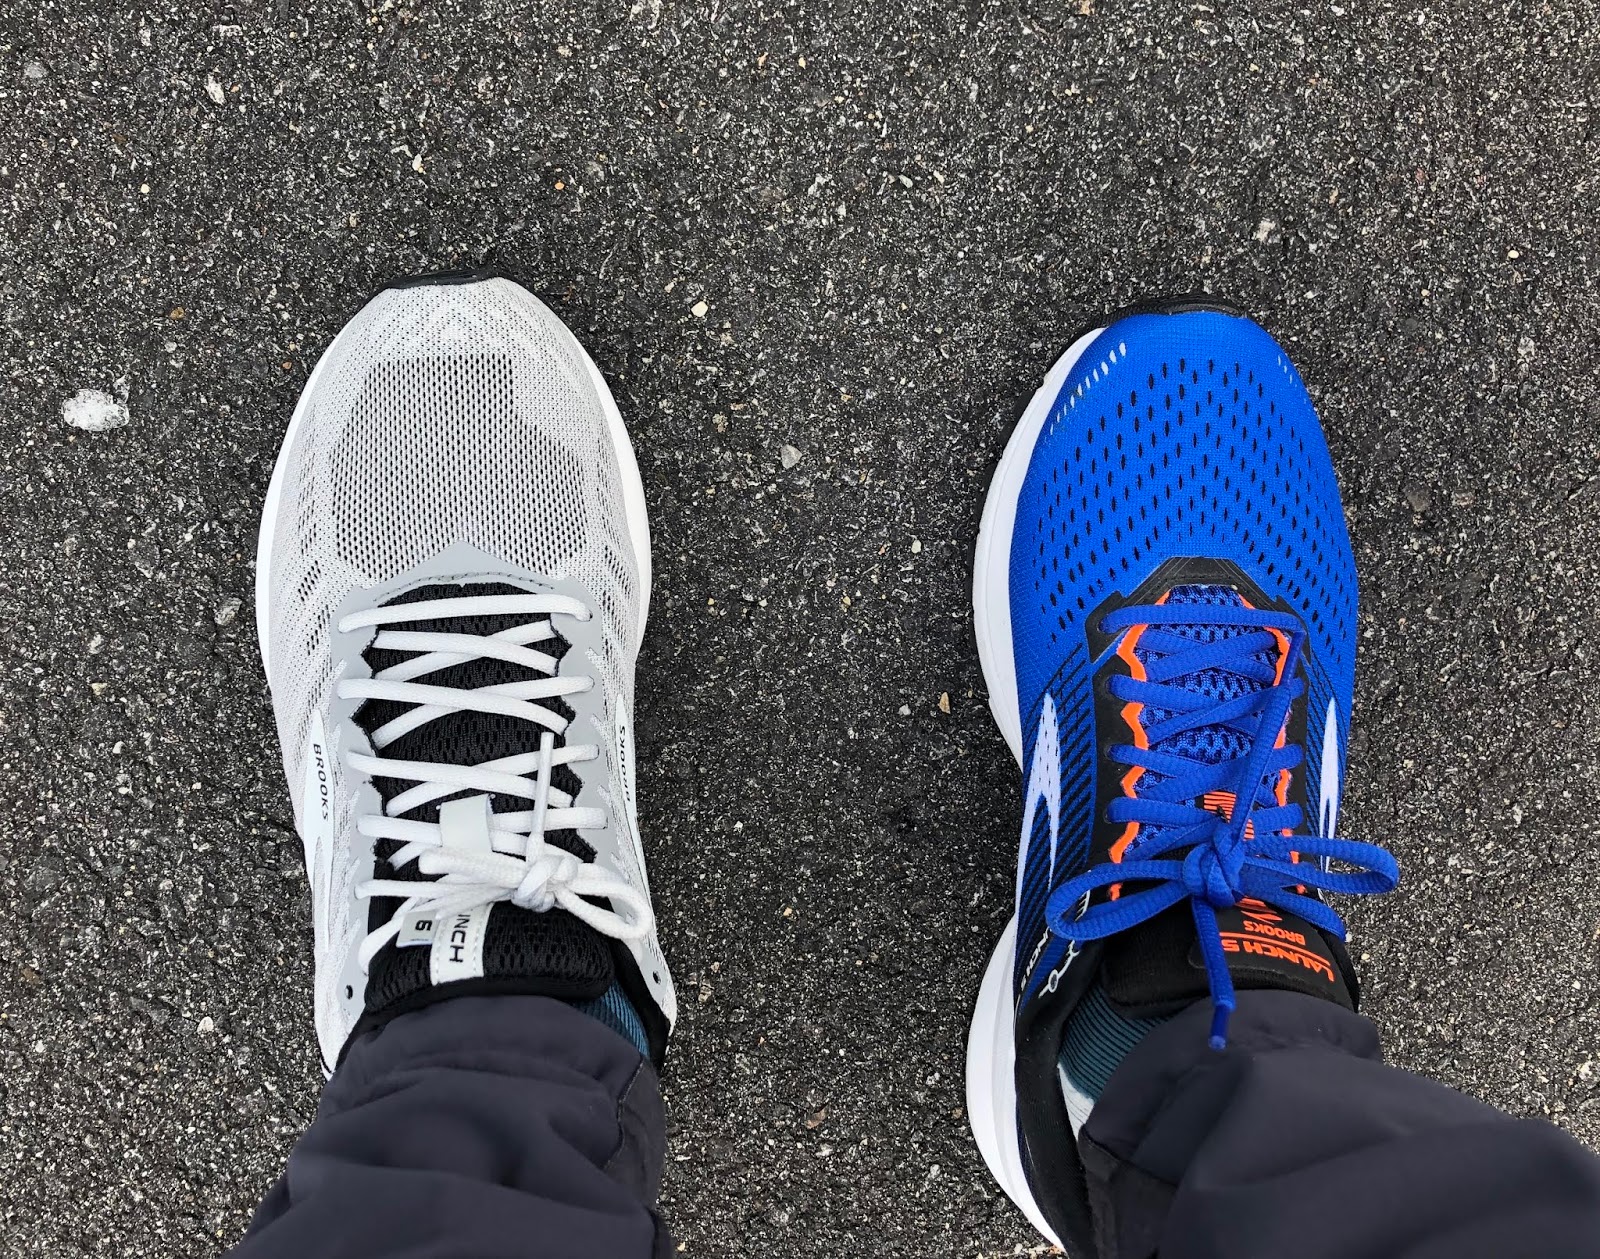 difference between brooks launch 5 and 6